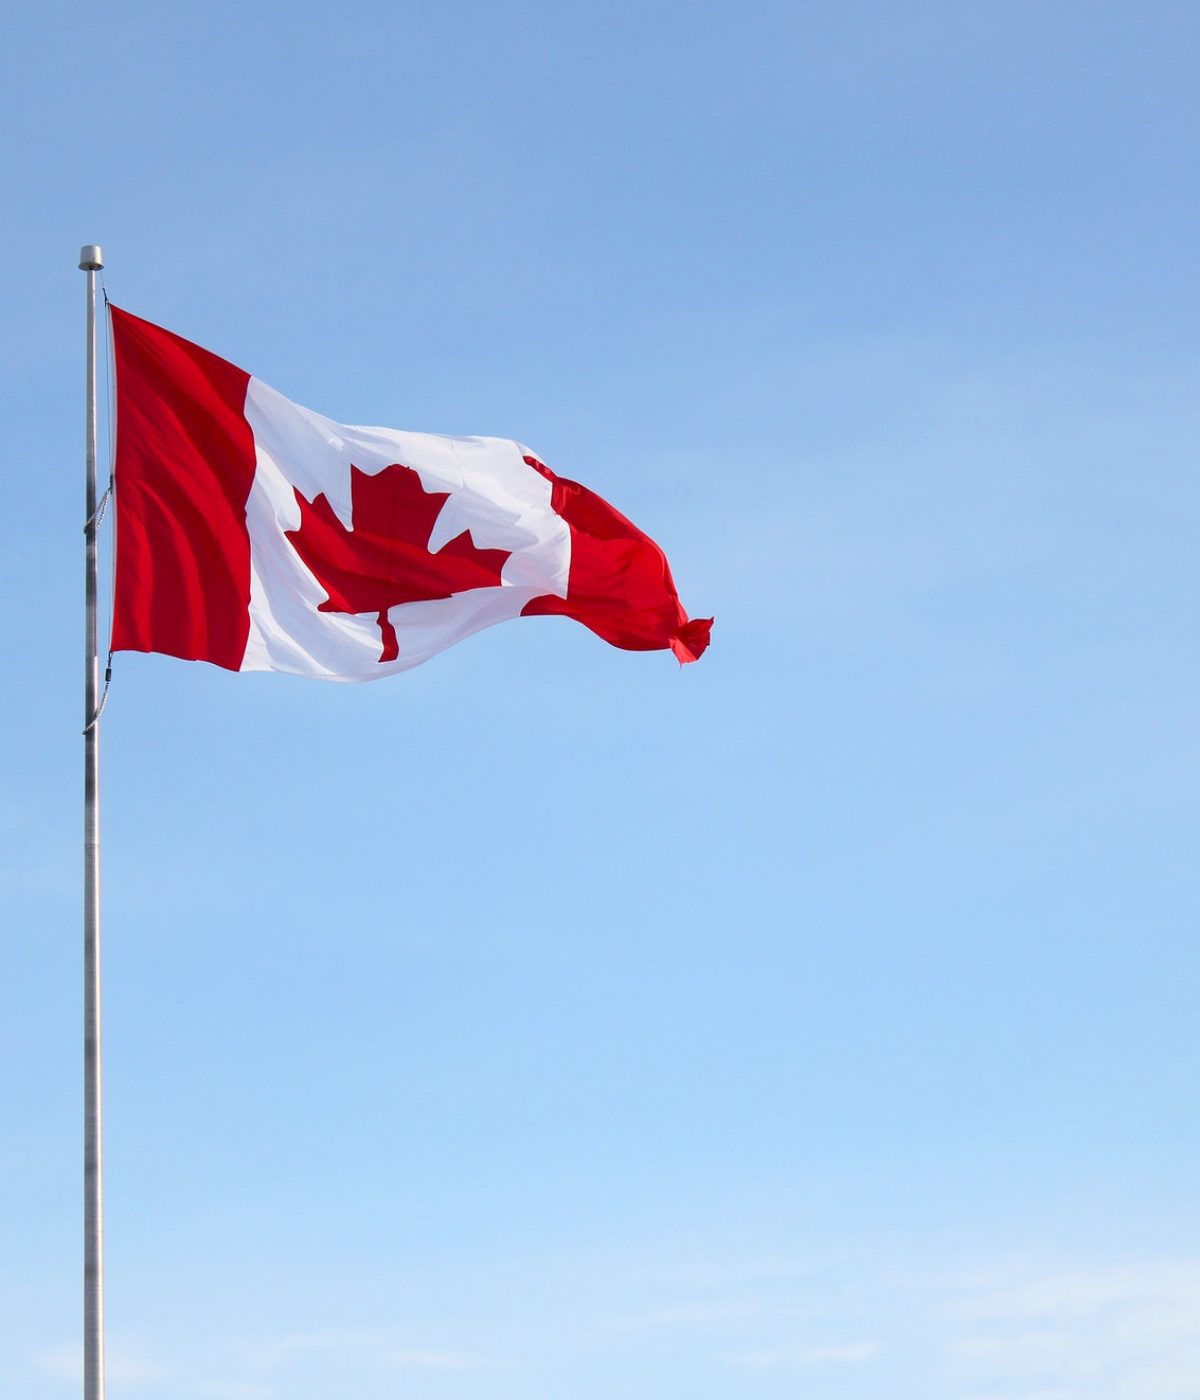 The National Flag of Canada, sometimes known as the Maple Leaf Flag (l